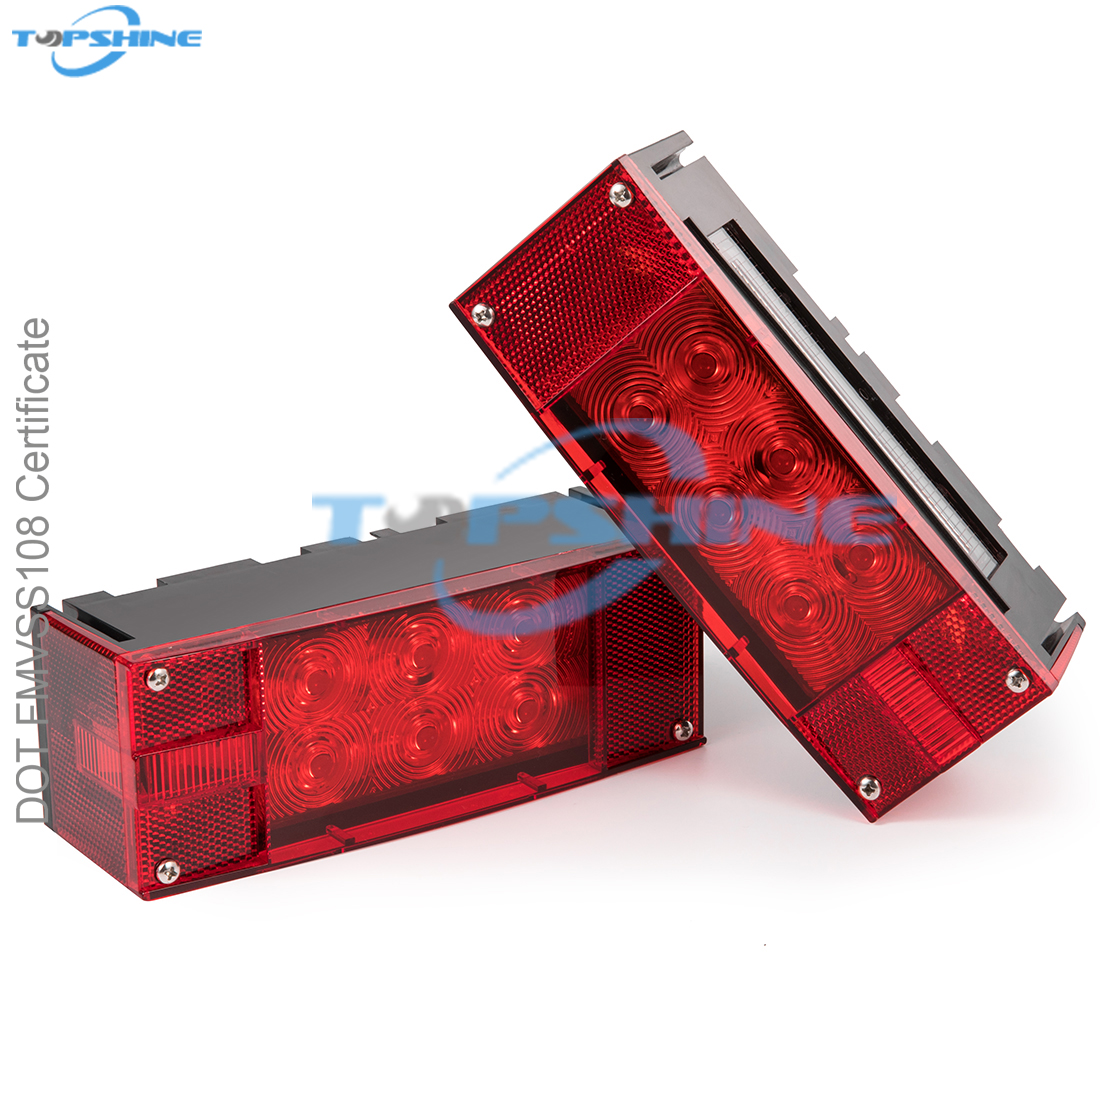 101002W 12V Rectangular Submersible LED Tail Lights kit for Trailer Truck Boat Featured Image